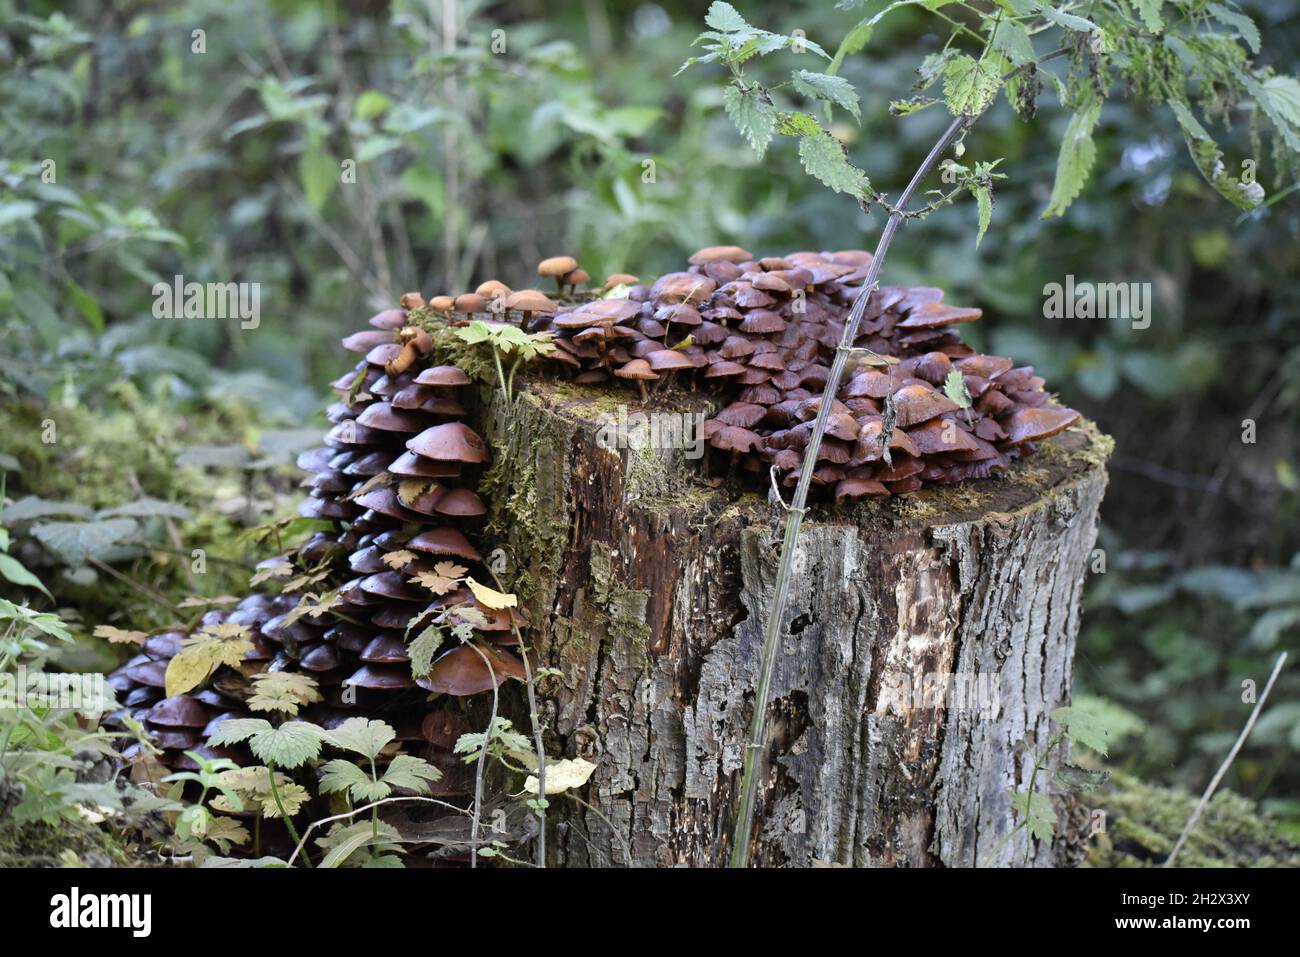 Cascade of Brown Cluster Mushrooms and Bracket Fungus Covering Top and Left Side of a Decaying Tree Stump in October in Wales, UK Stock Photo